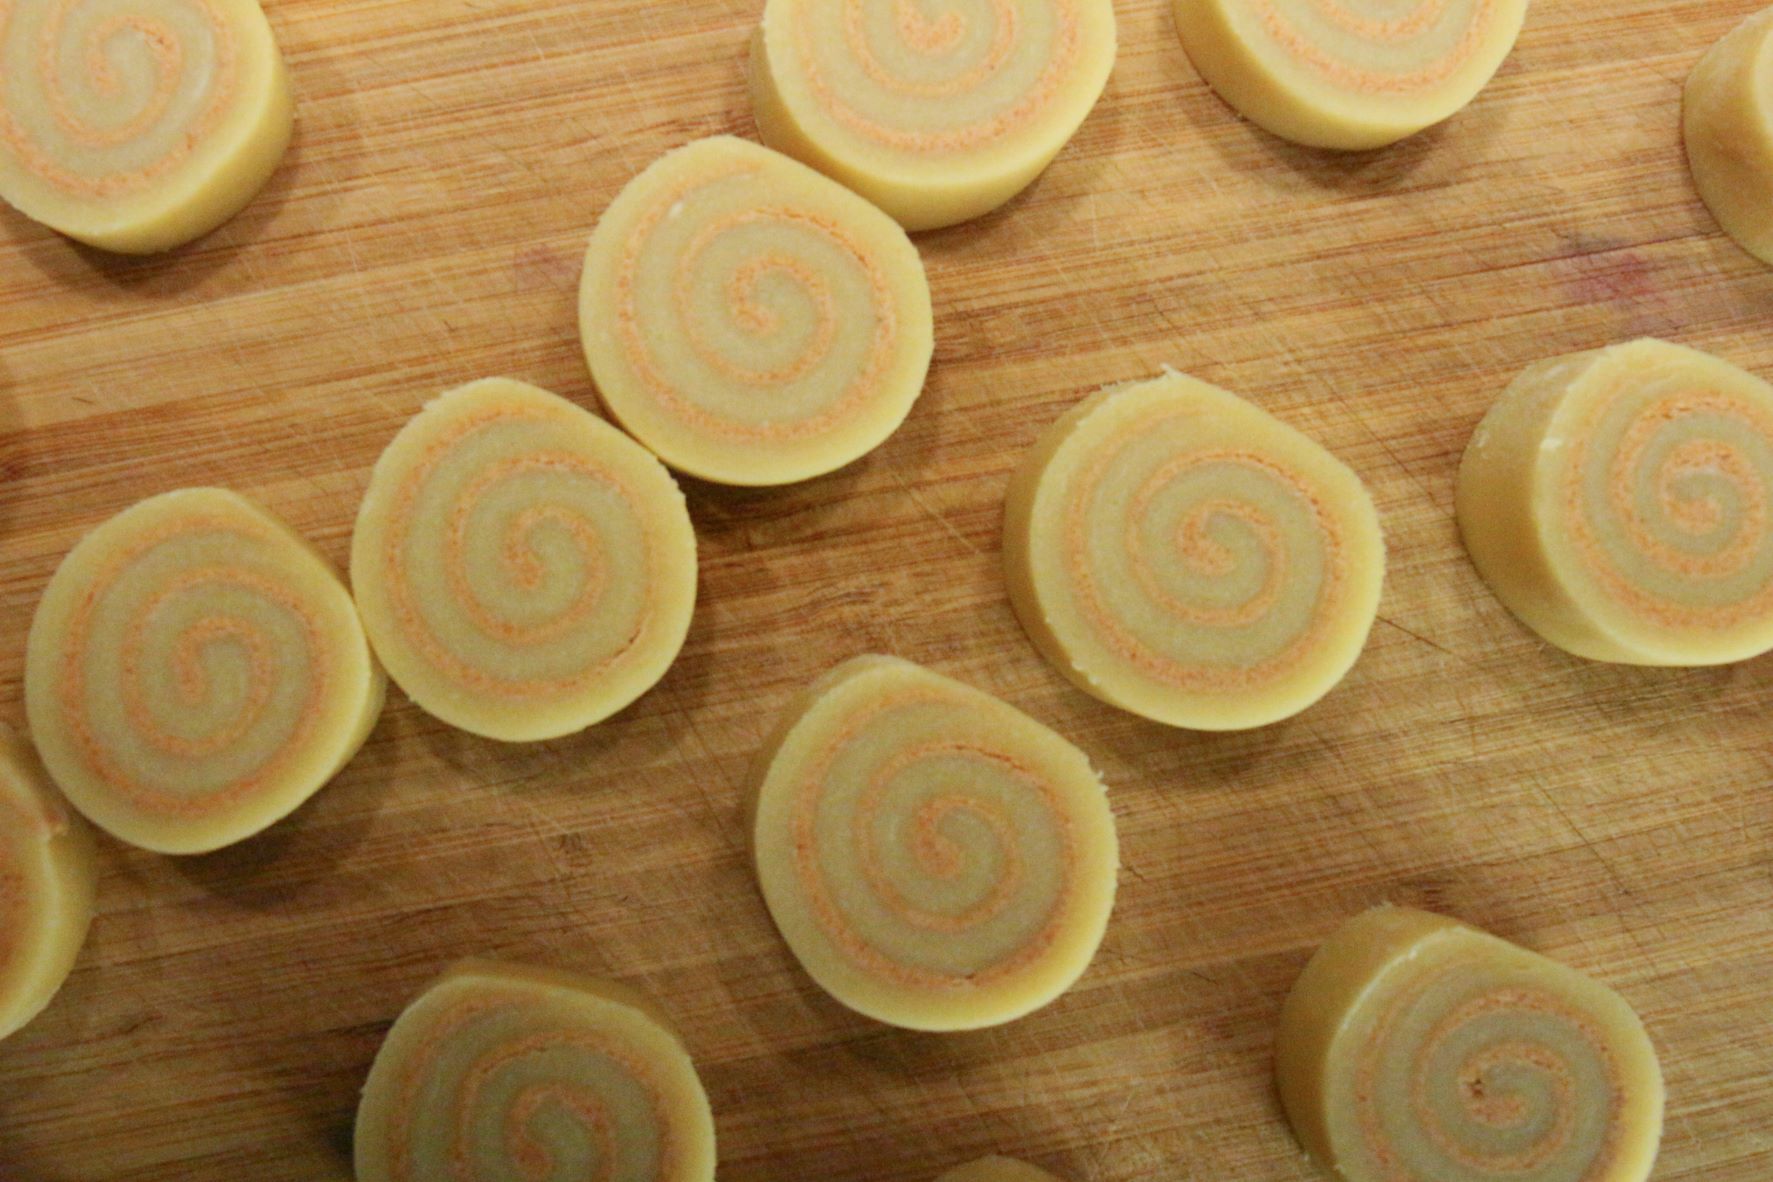 Sliced cookies ready to bake.